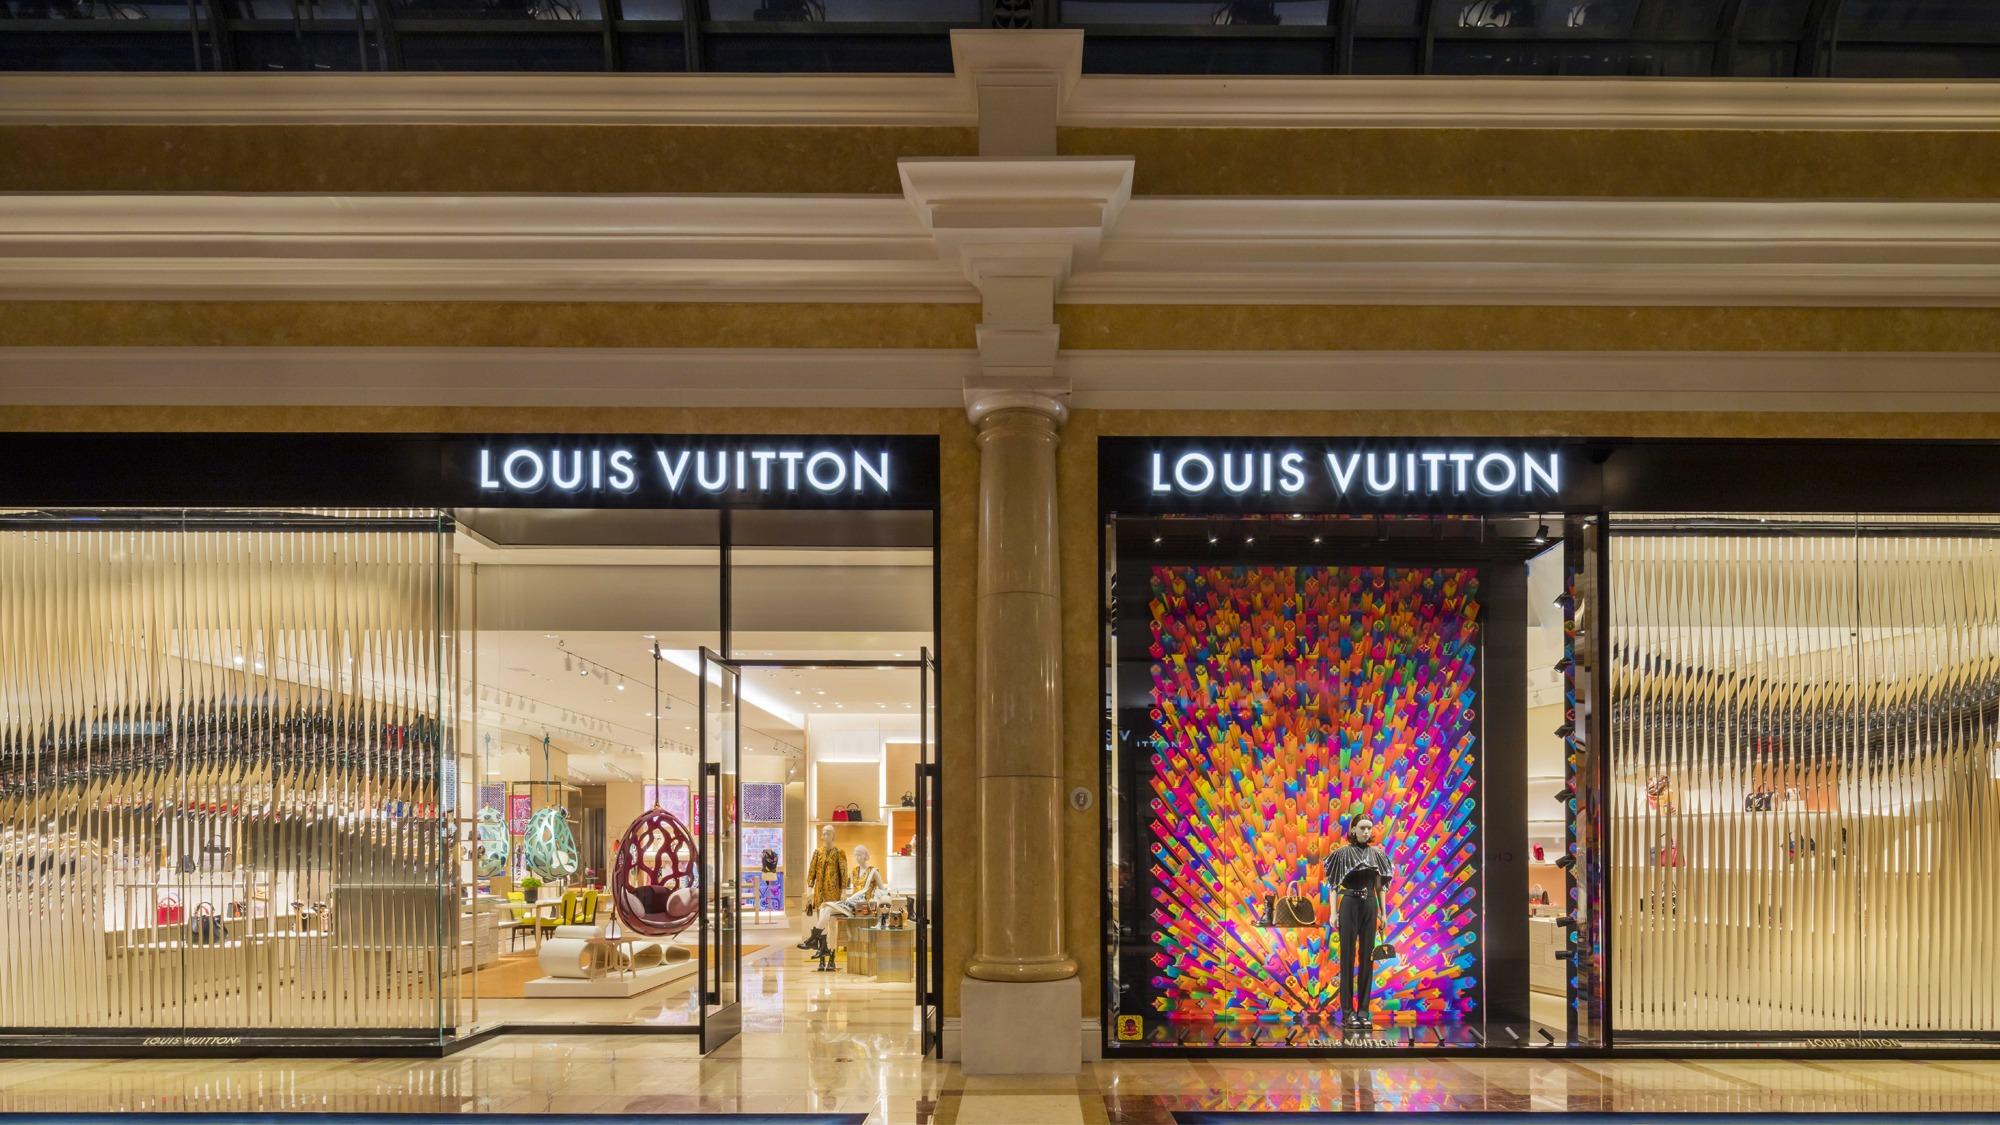 Exterior of Louis Vuitton Store in Las Vegas Nevada Editorial Image - Image  of entrance, luxury: 152542600